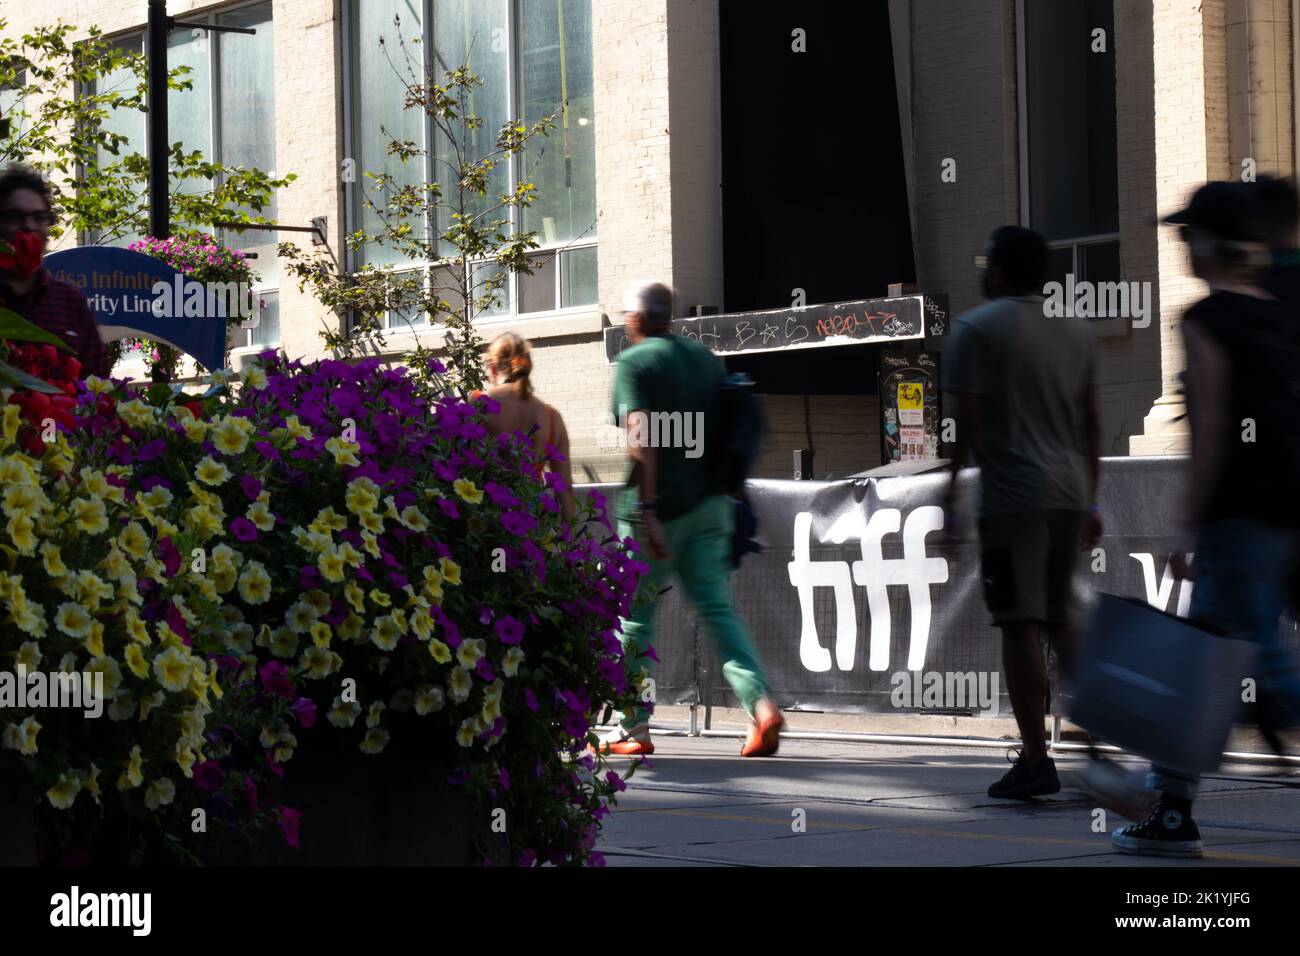 A crowd of people walks by a brightly lit TIFF, Toronto International Film Festival, logo in downtown Toronto during the popular film festival. Stock Photo